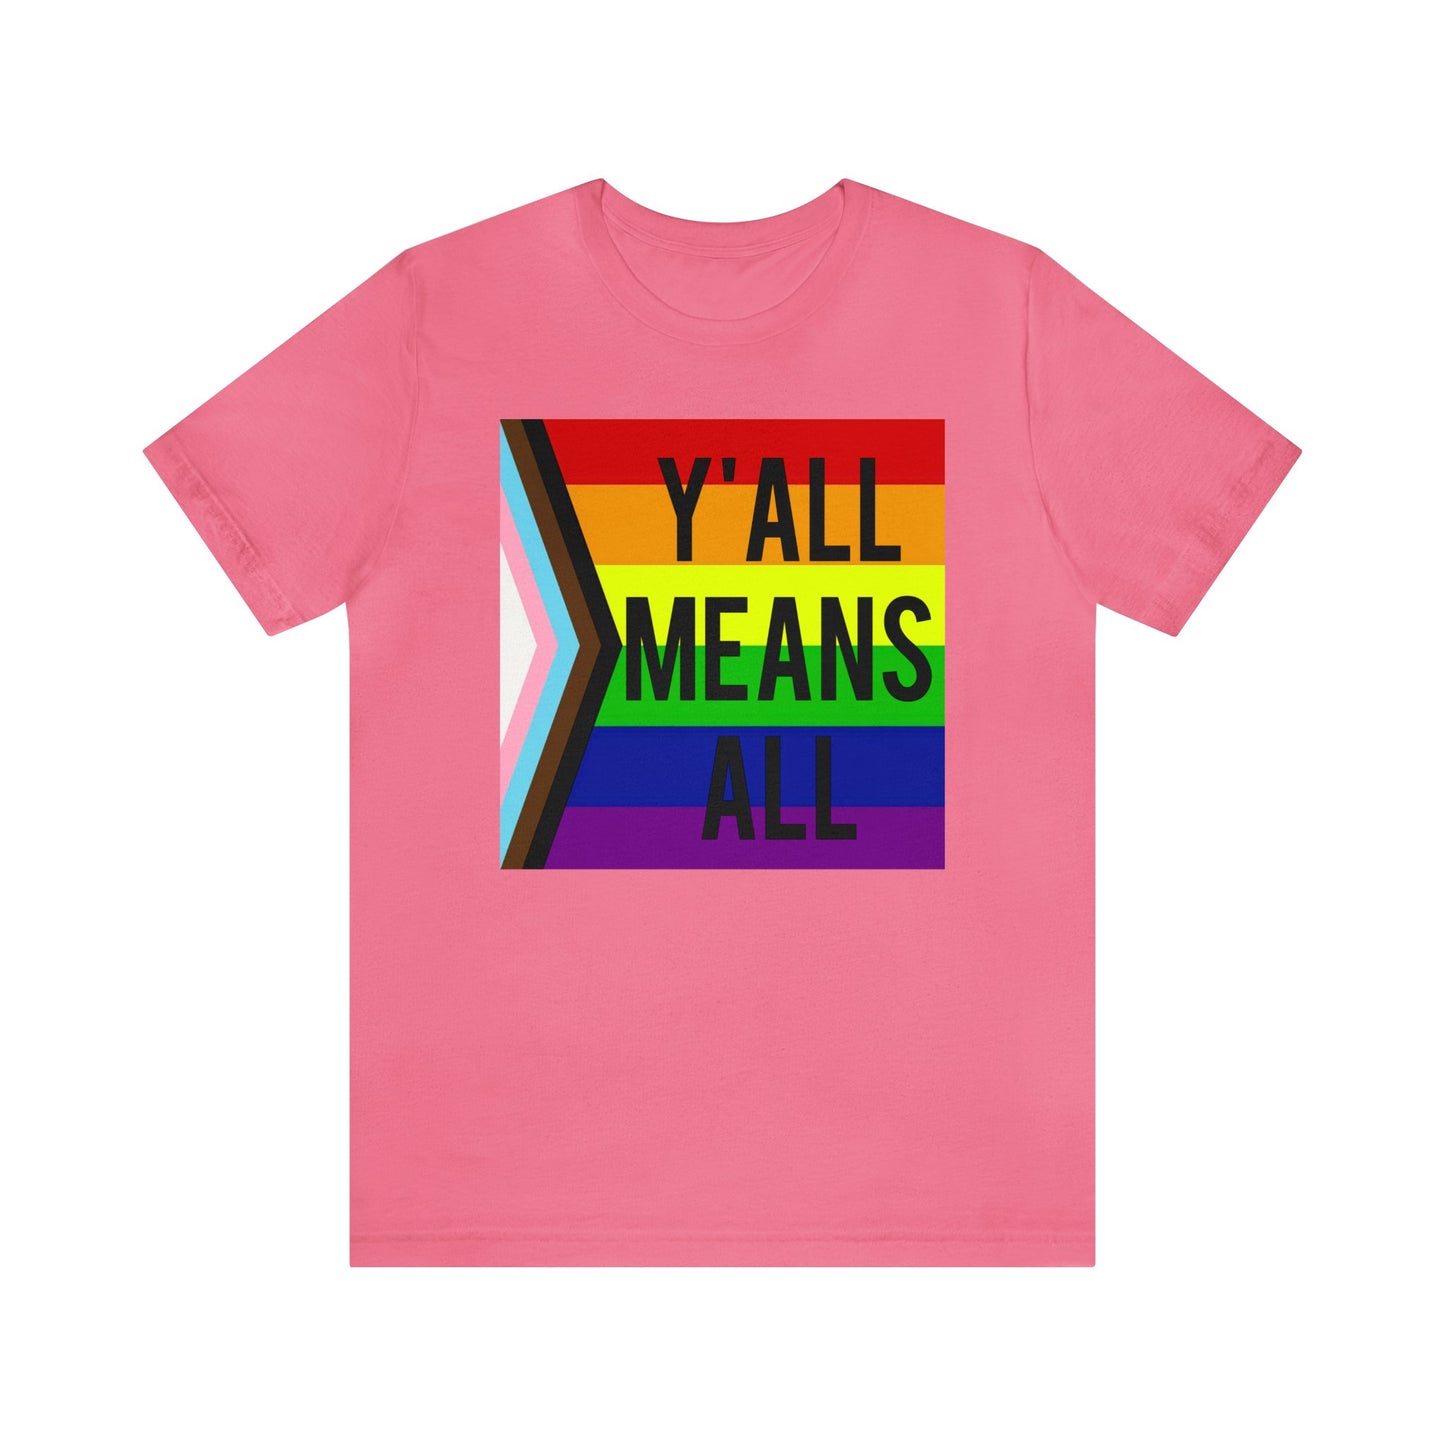 Y'ALL MEANS ALL LGBTQ Pride Adult Unisex T-Shirt